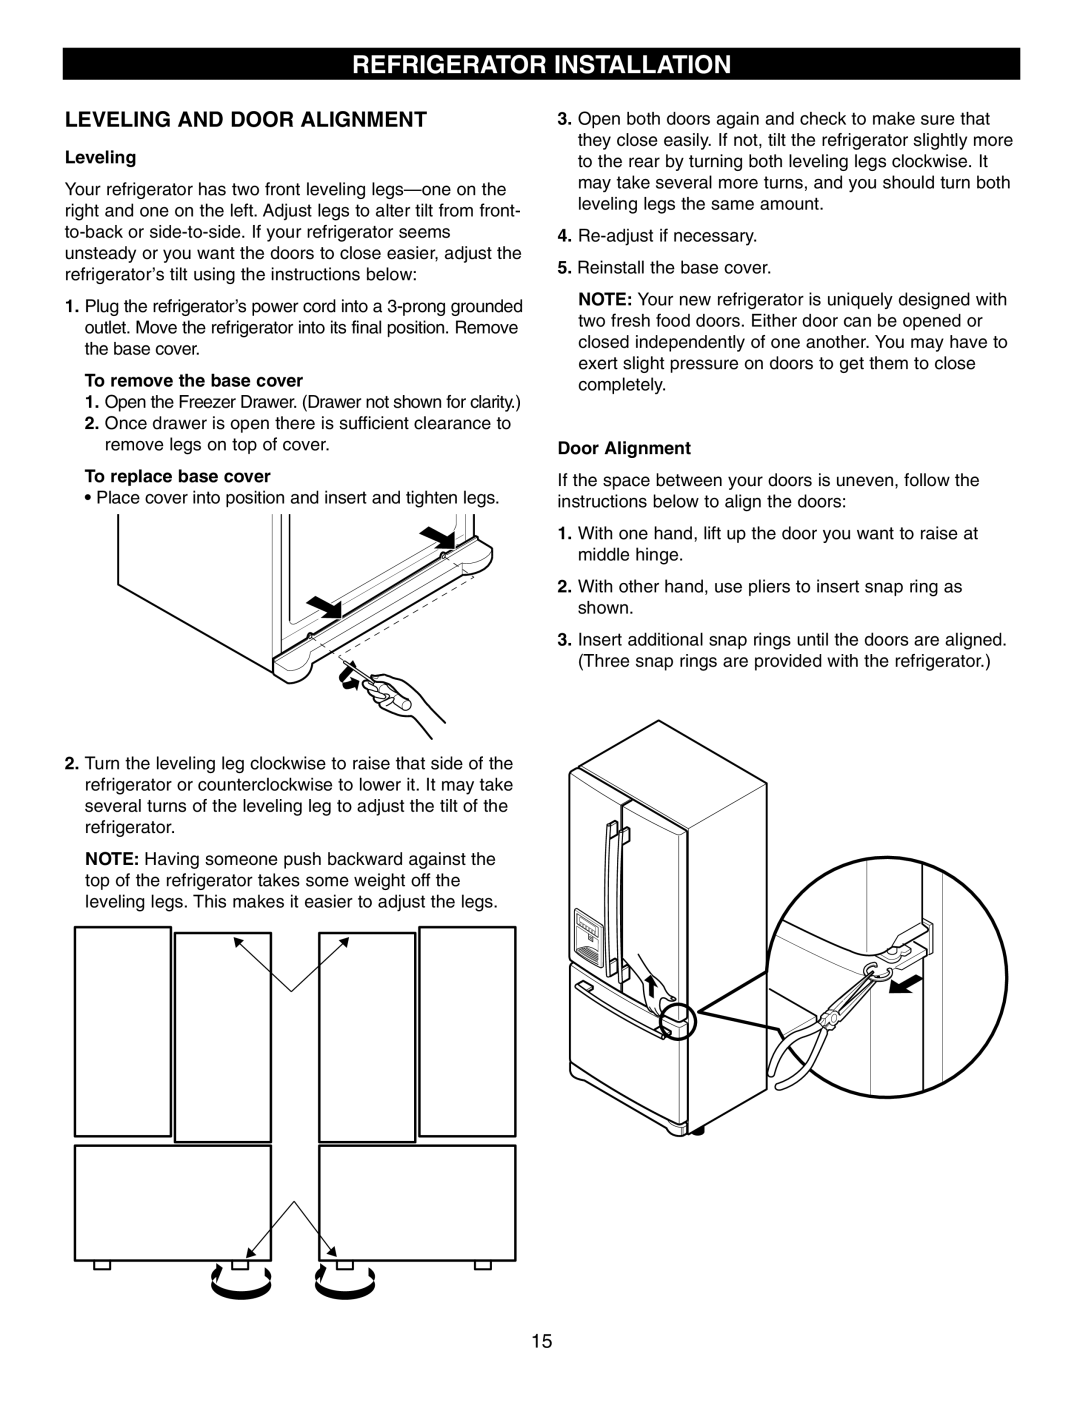 LG Electronics LFX25960, LFX25970 manual Refrigerator Installation, Leveling And Door Alignment, To remove the base cover 